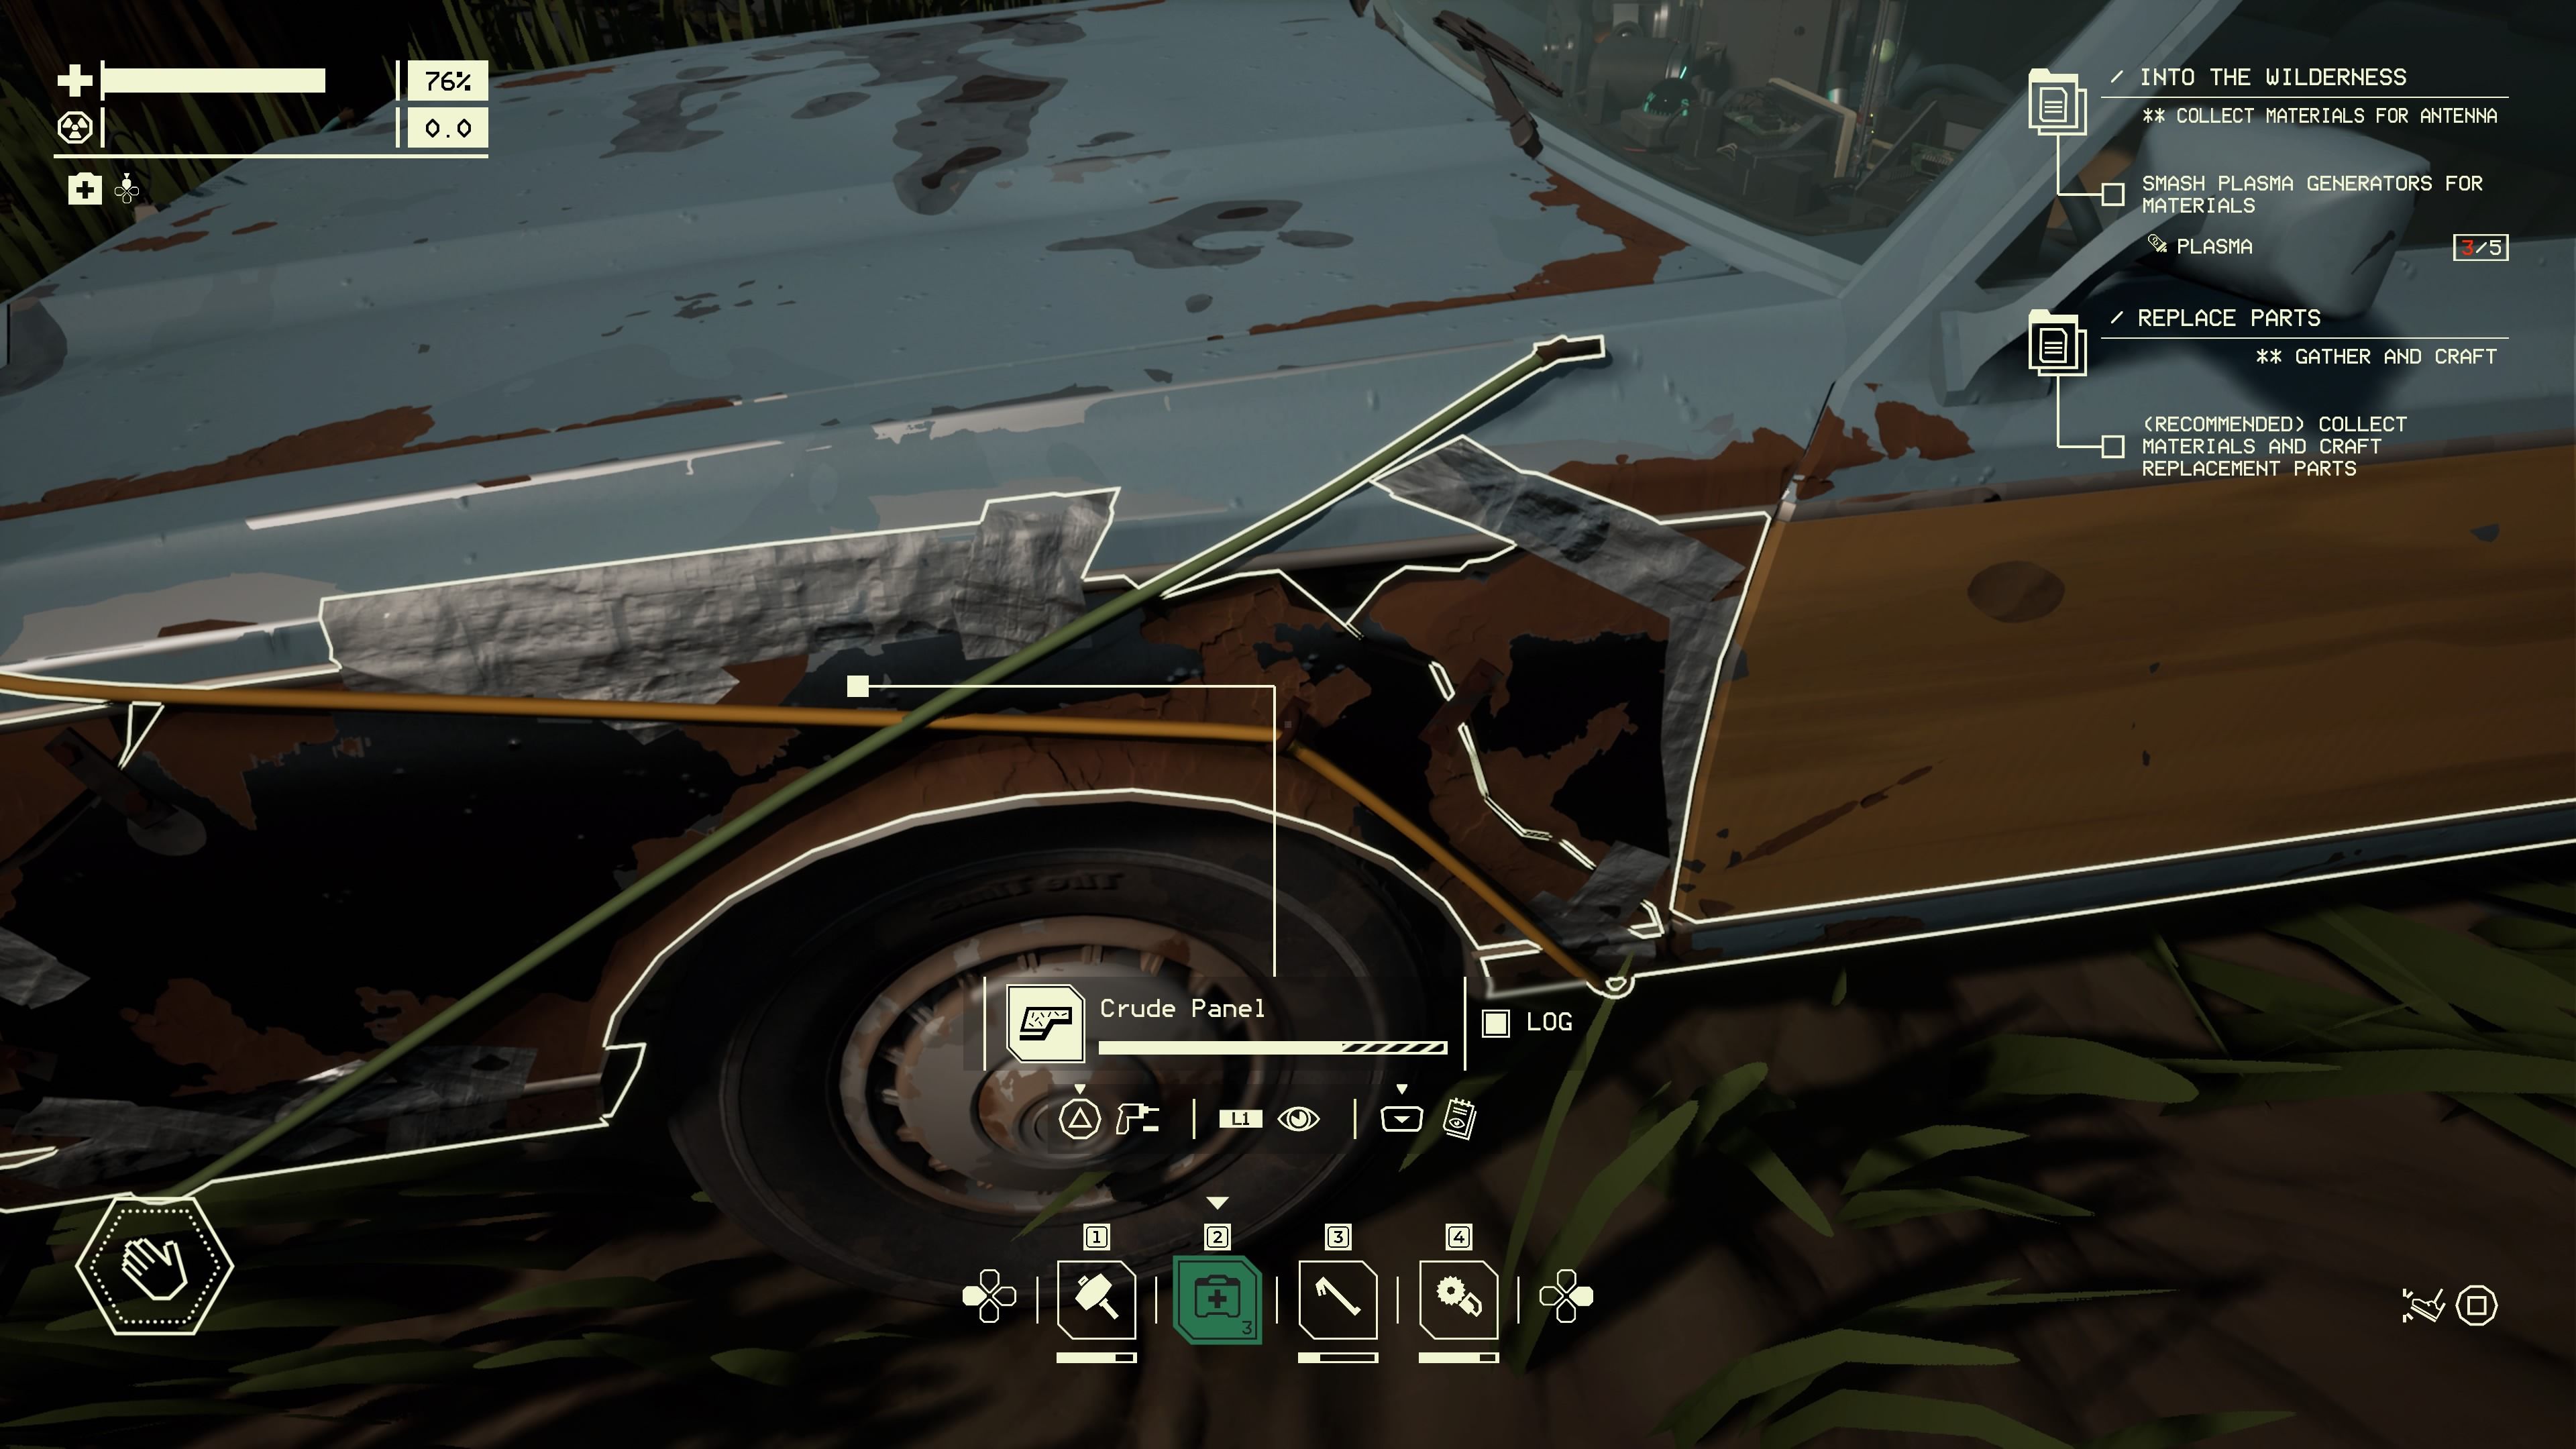 Crude Panel on the player's car with a chunk of its durability missing in Pacific Drive.